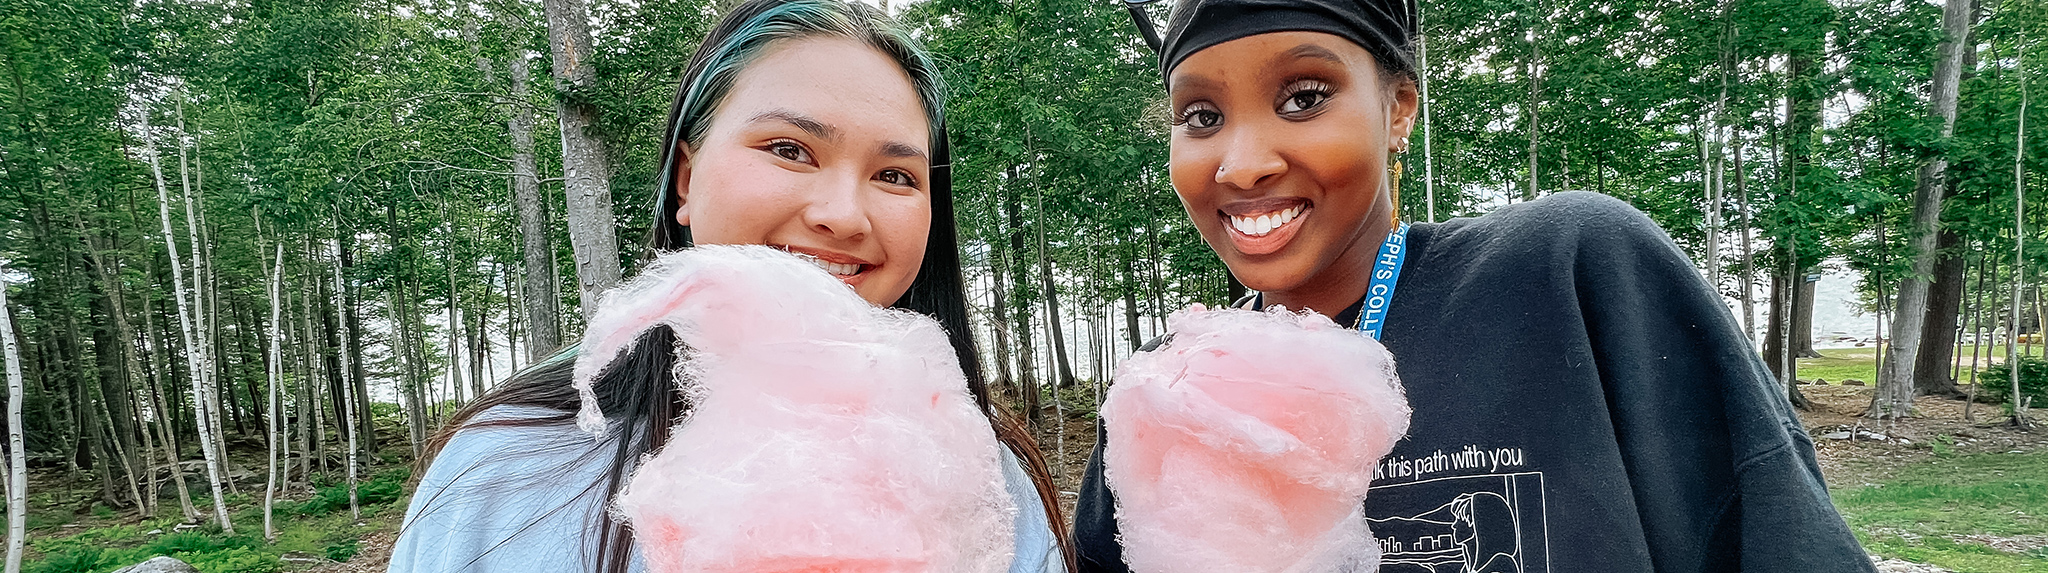 two new students enjoy cotton candy at a welcome to campus event